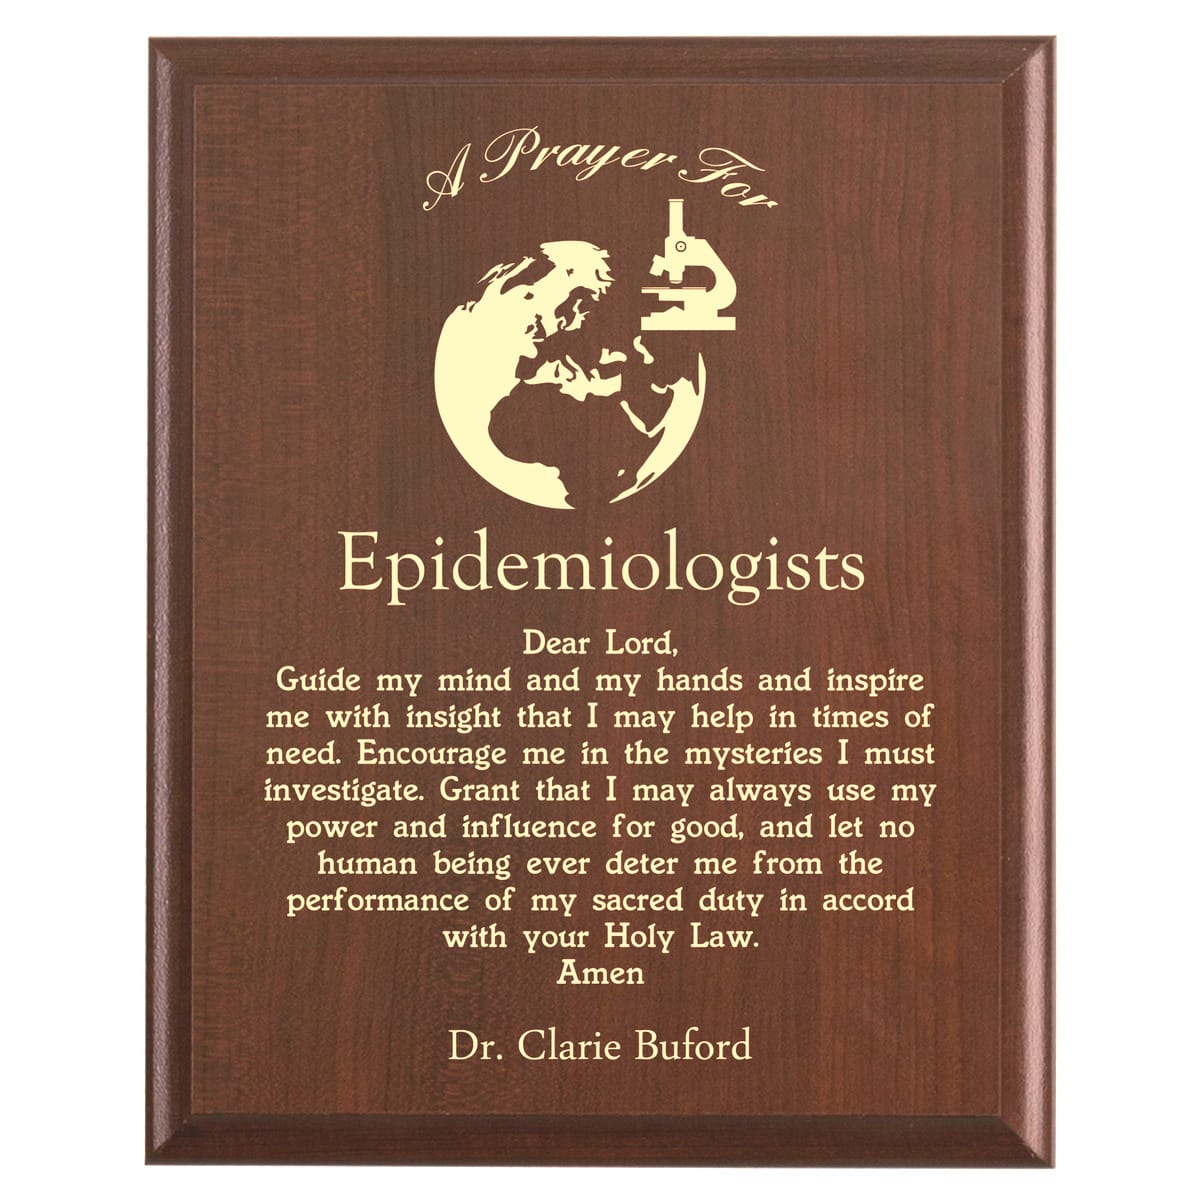 Plaque photo: Epidemiologists Prayer Plaque design with free personalization. Wood style finish with customized text.